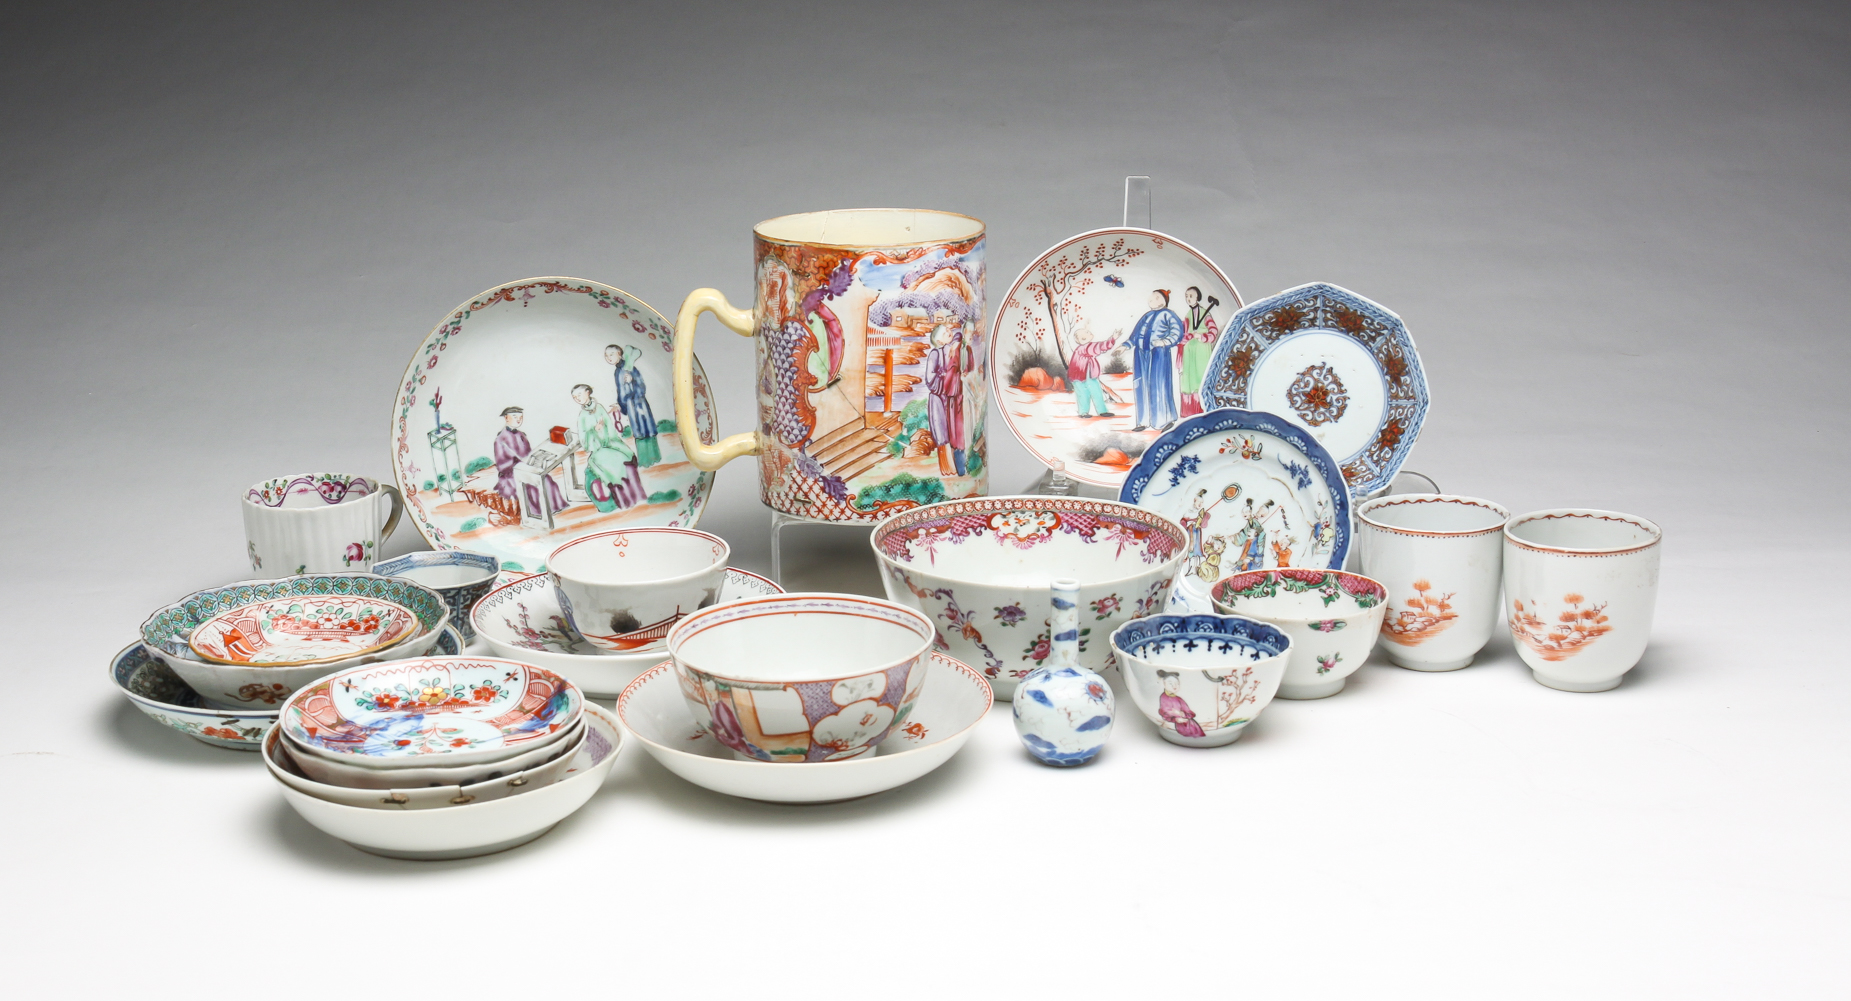 GROUP OF CHINESE EXPORT. Late 18th-19th